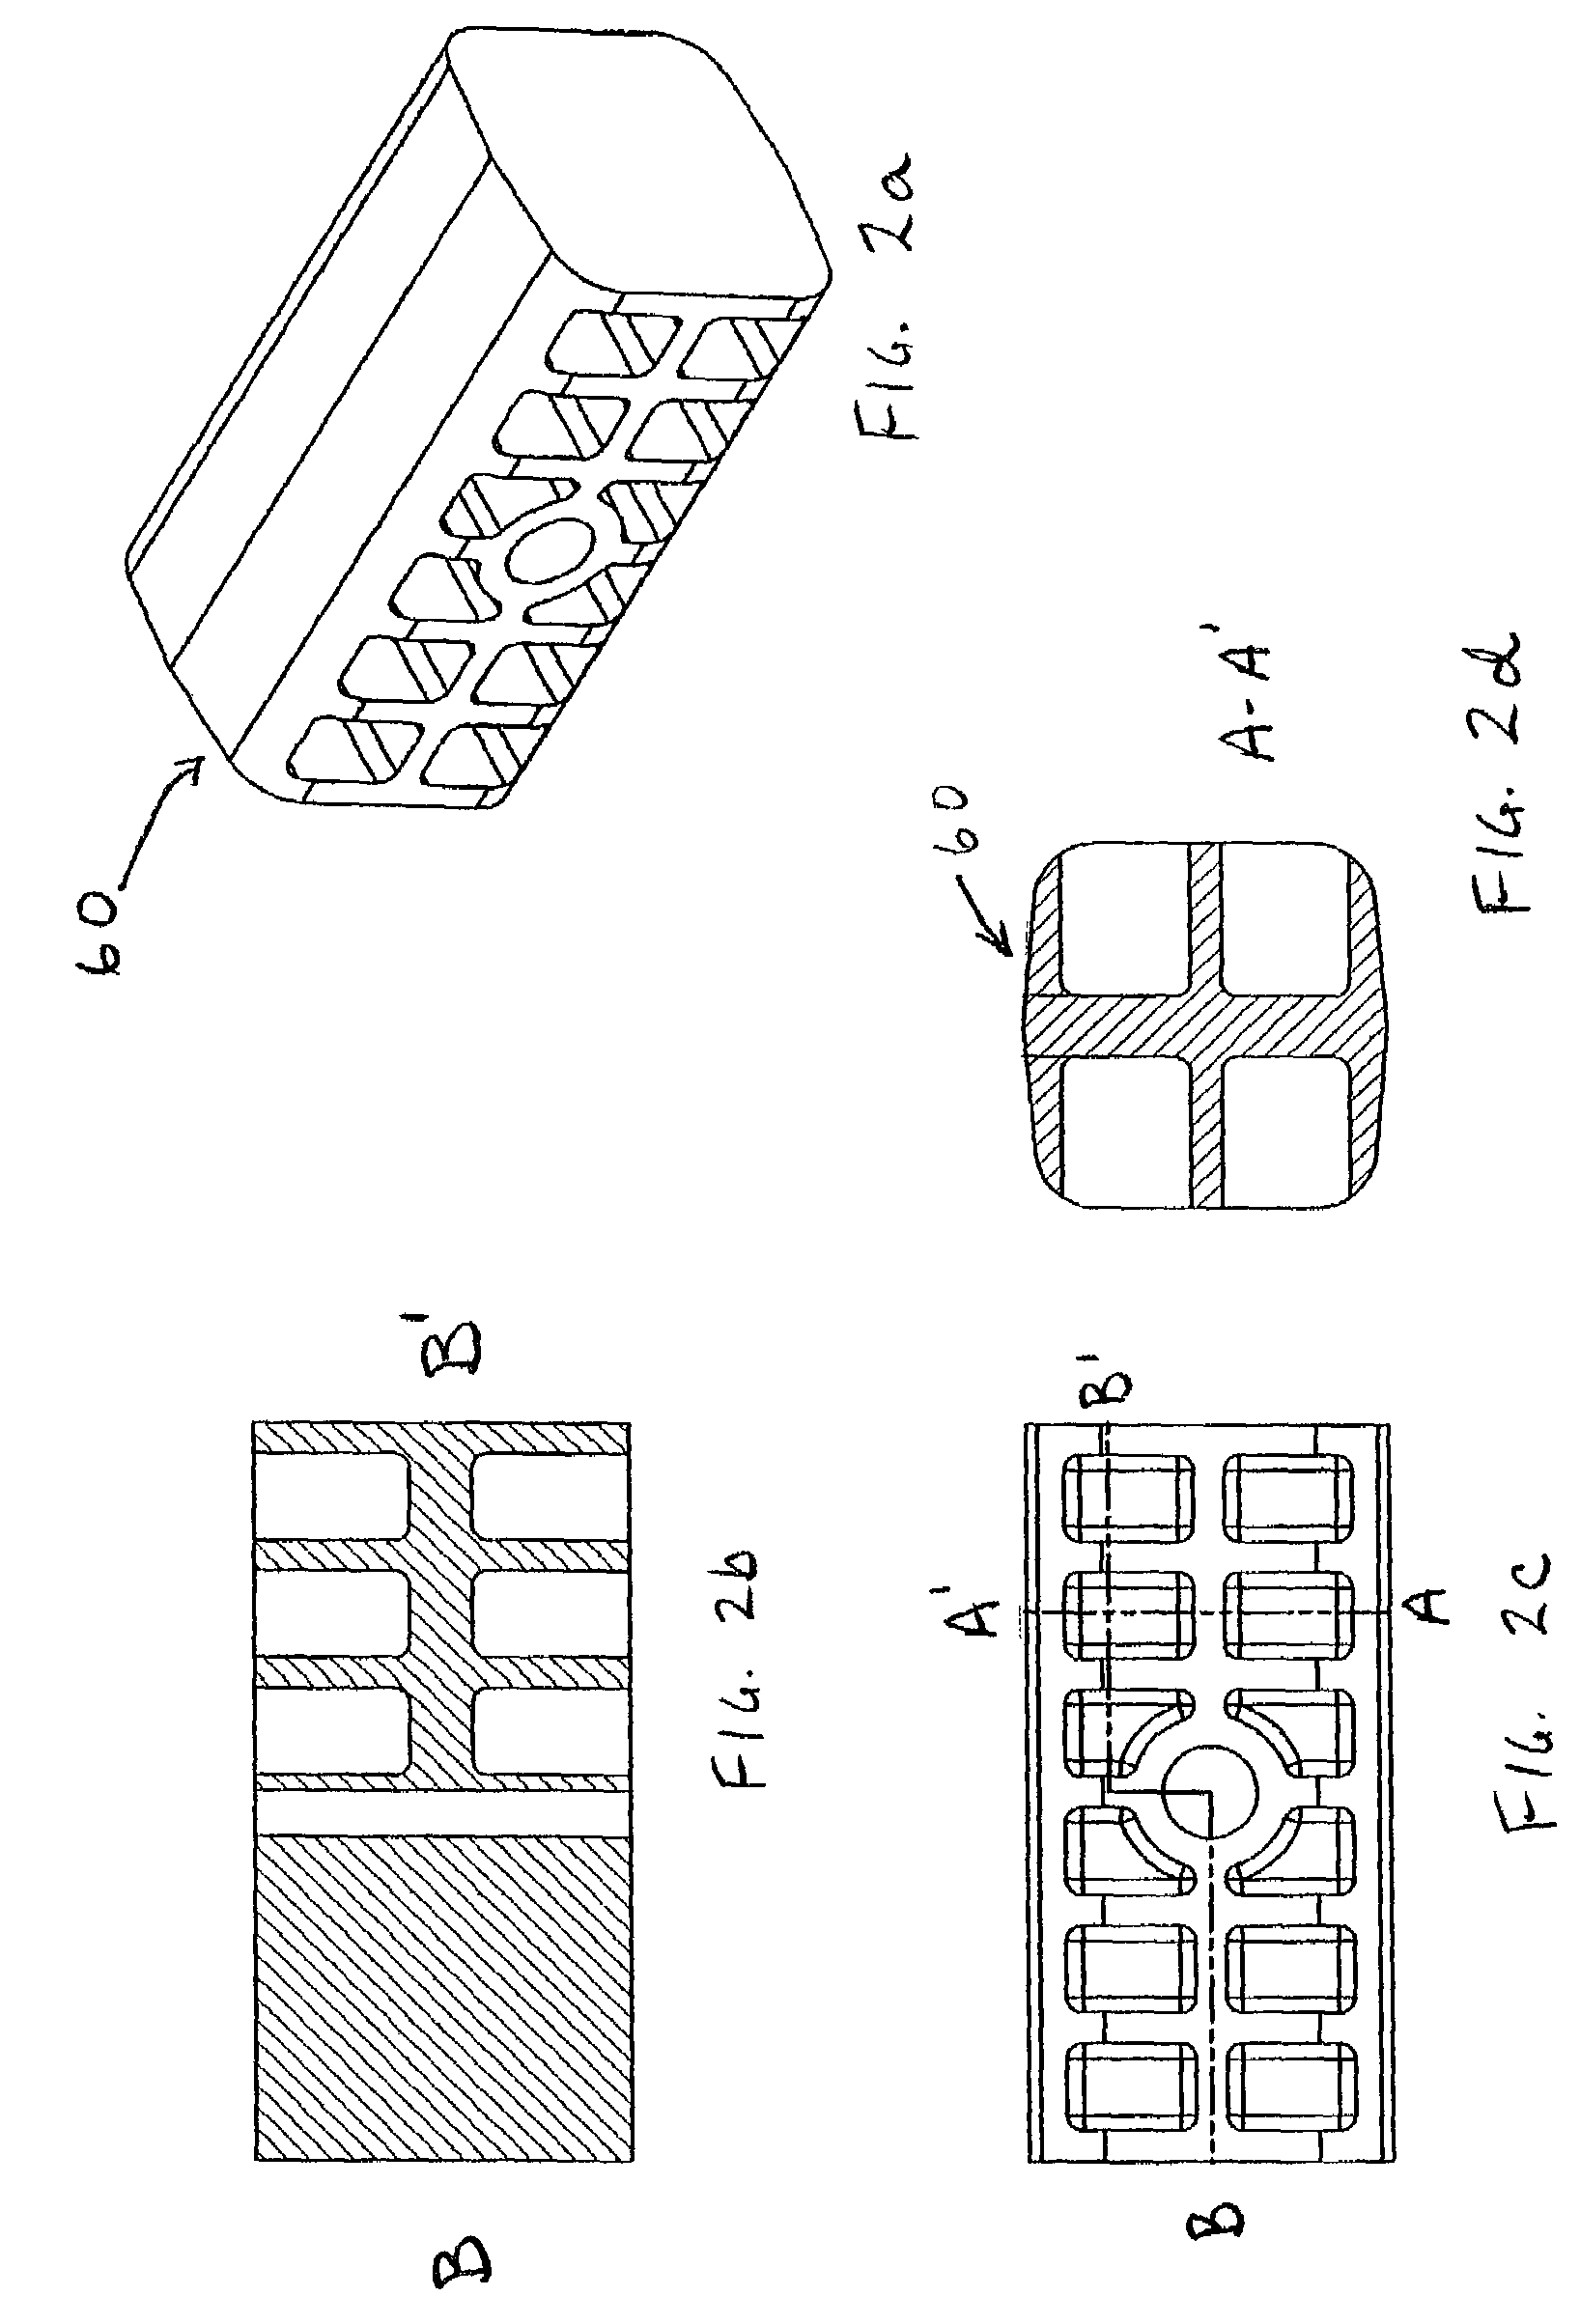 Mat assembly for heavy equipment transit and support